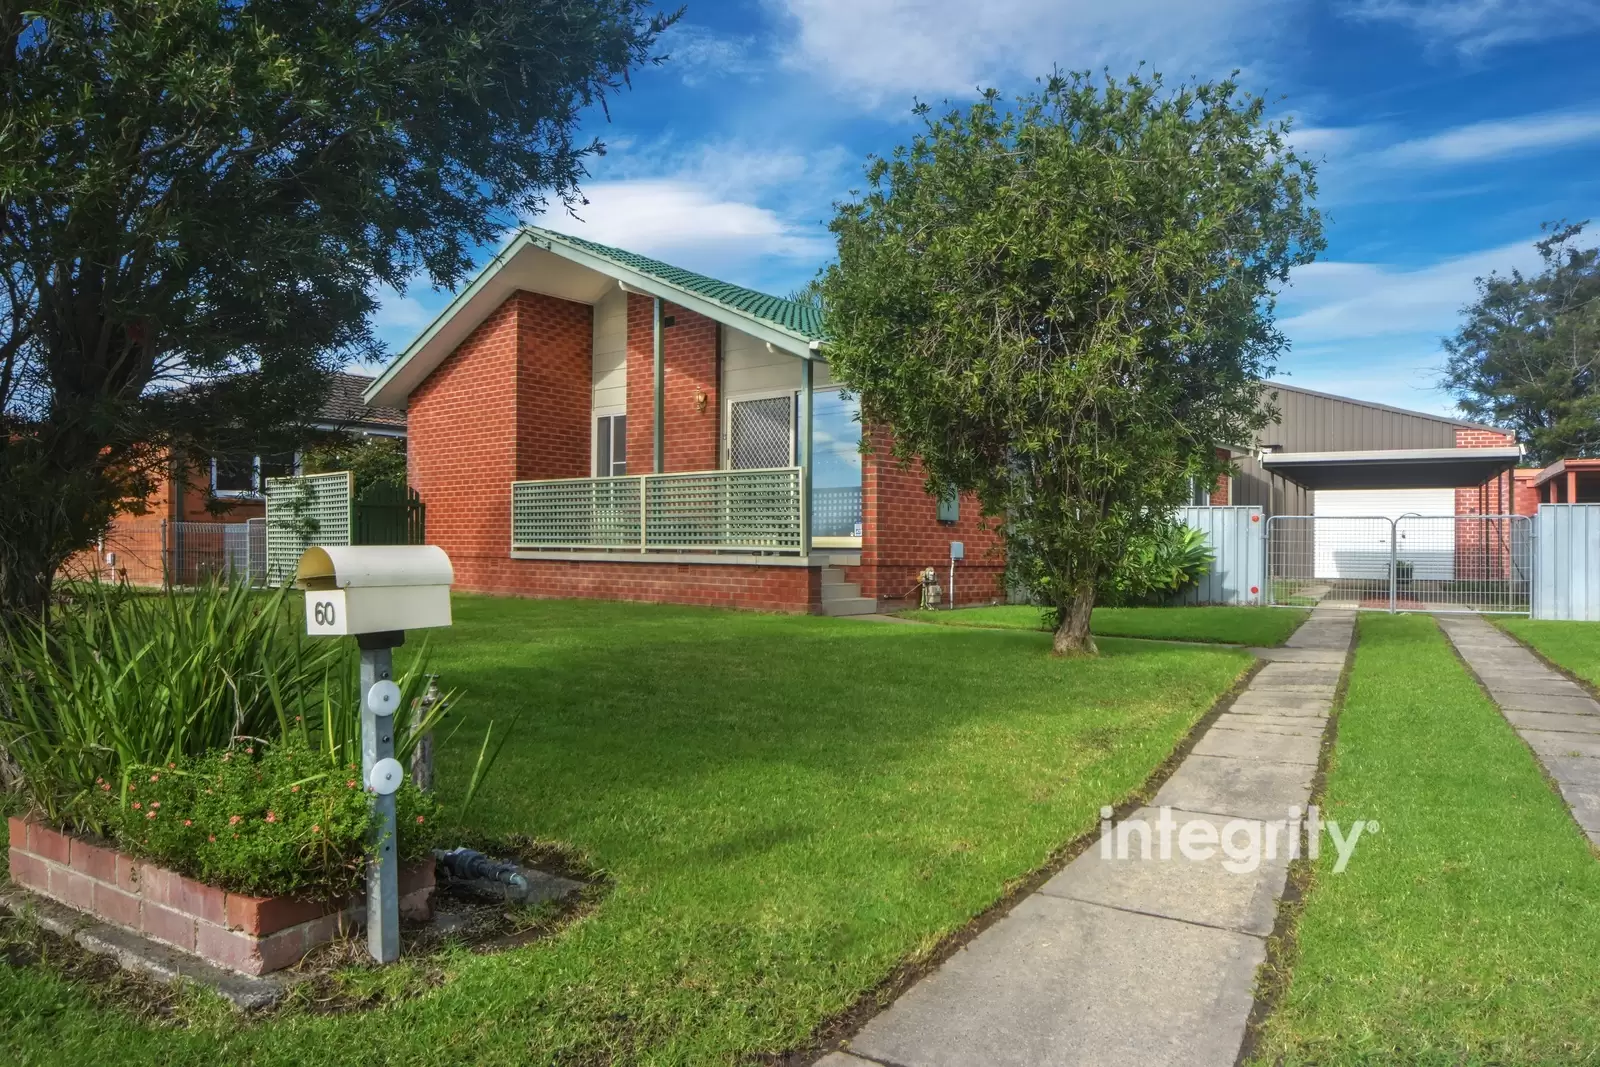 60 McKay Street, Nowra Sold by Integrity Real Estate - image 1